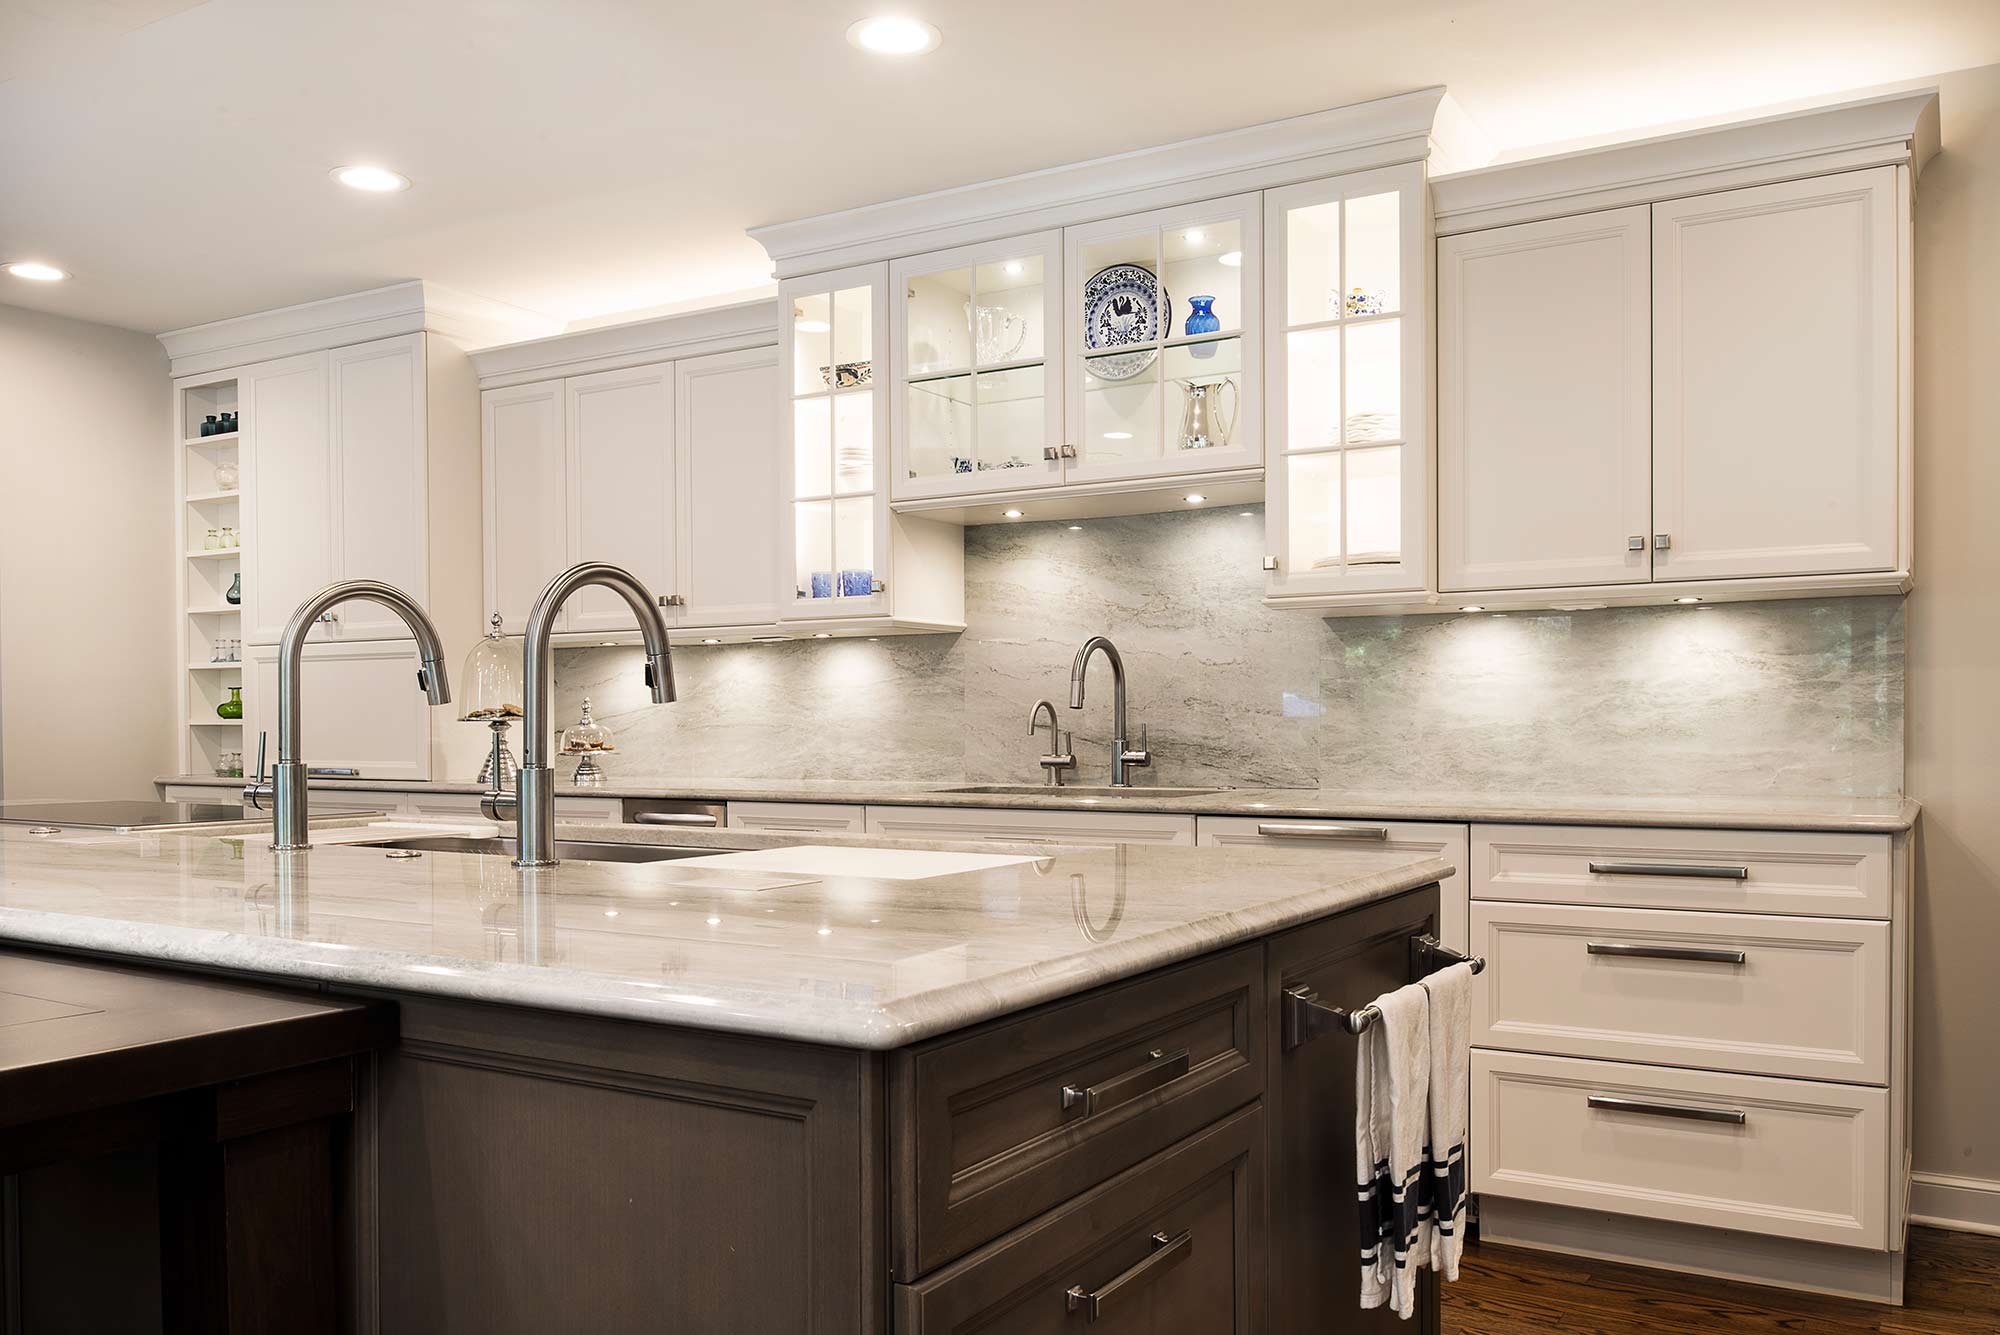 Cook, Eat, Watch 8 beautiful and functional kitchen with The Galley Workstation kitchen sink